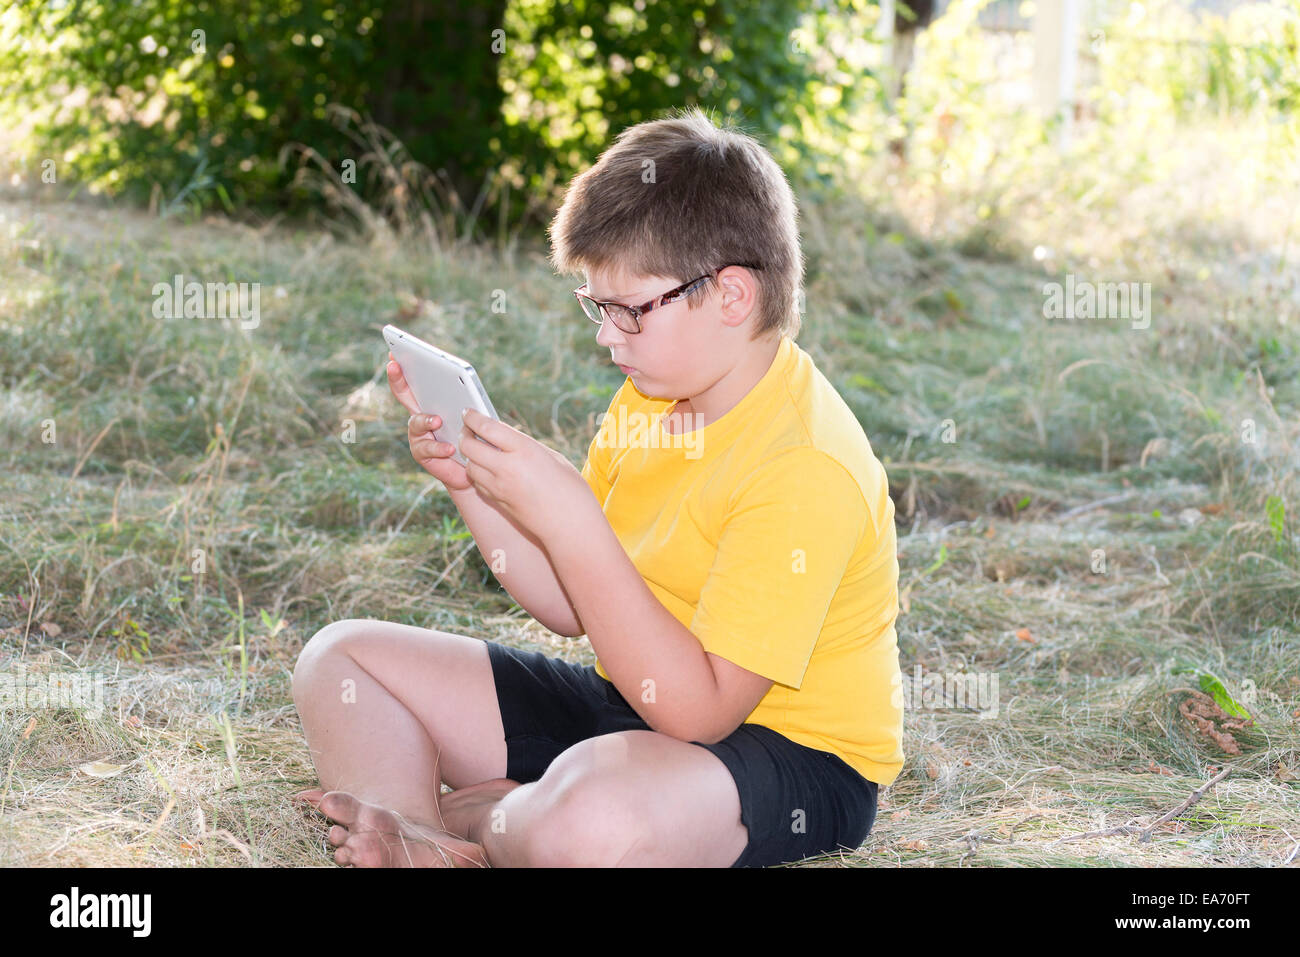 The boy in glasses looks tablet computer at nature Stock Photo